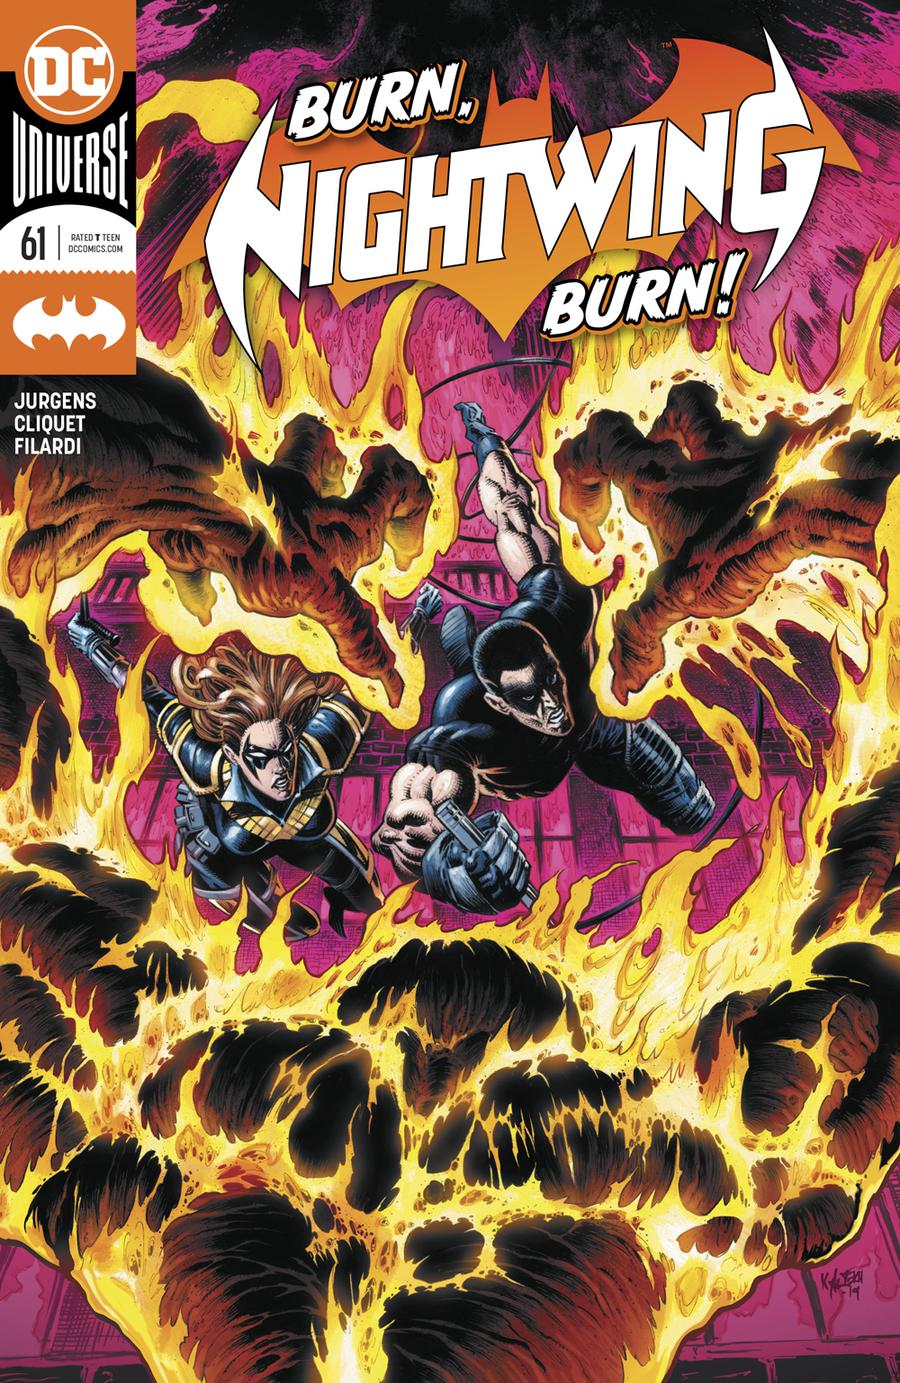 Nightwing Vol 4 #61 Cover A Regular Kyle Hotz Cover